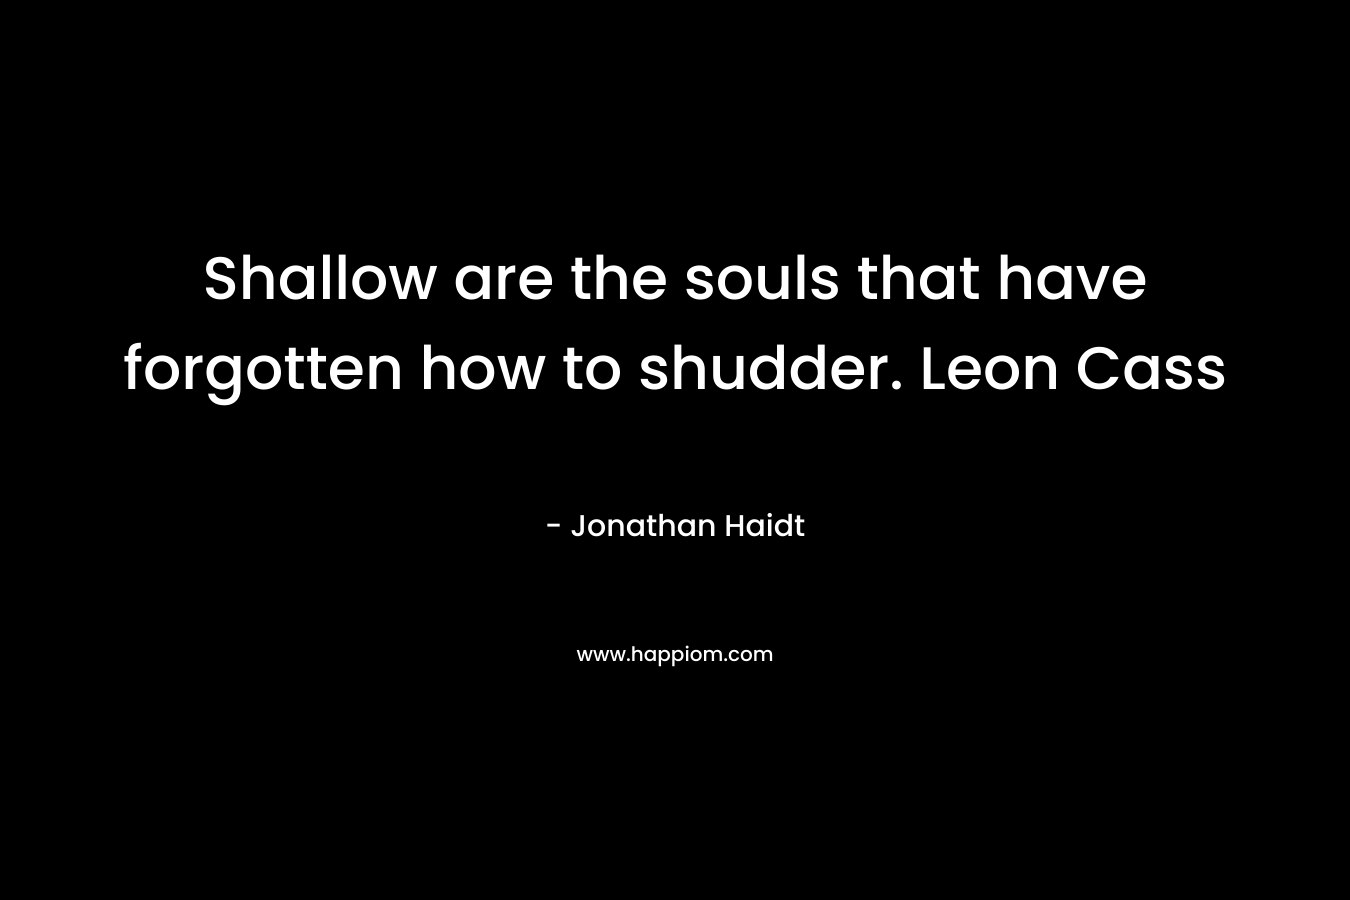 Shallow are the souls that have forgotten how to shudder. Leon Cass – Jonathan Haidt